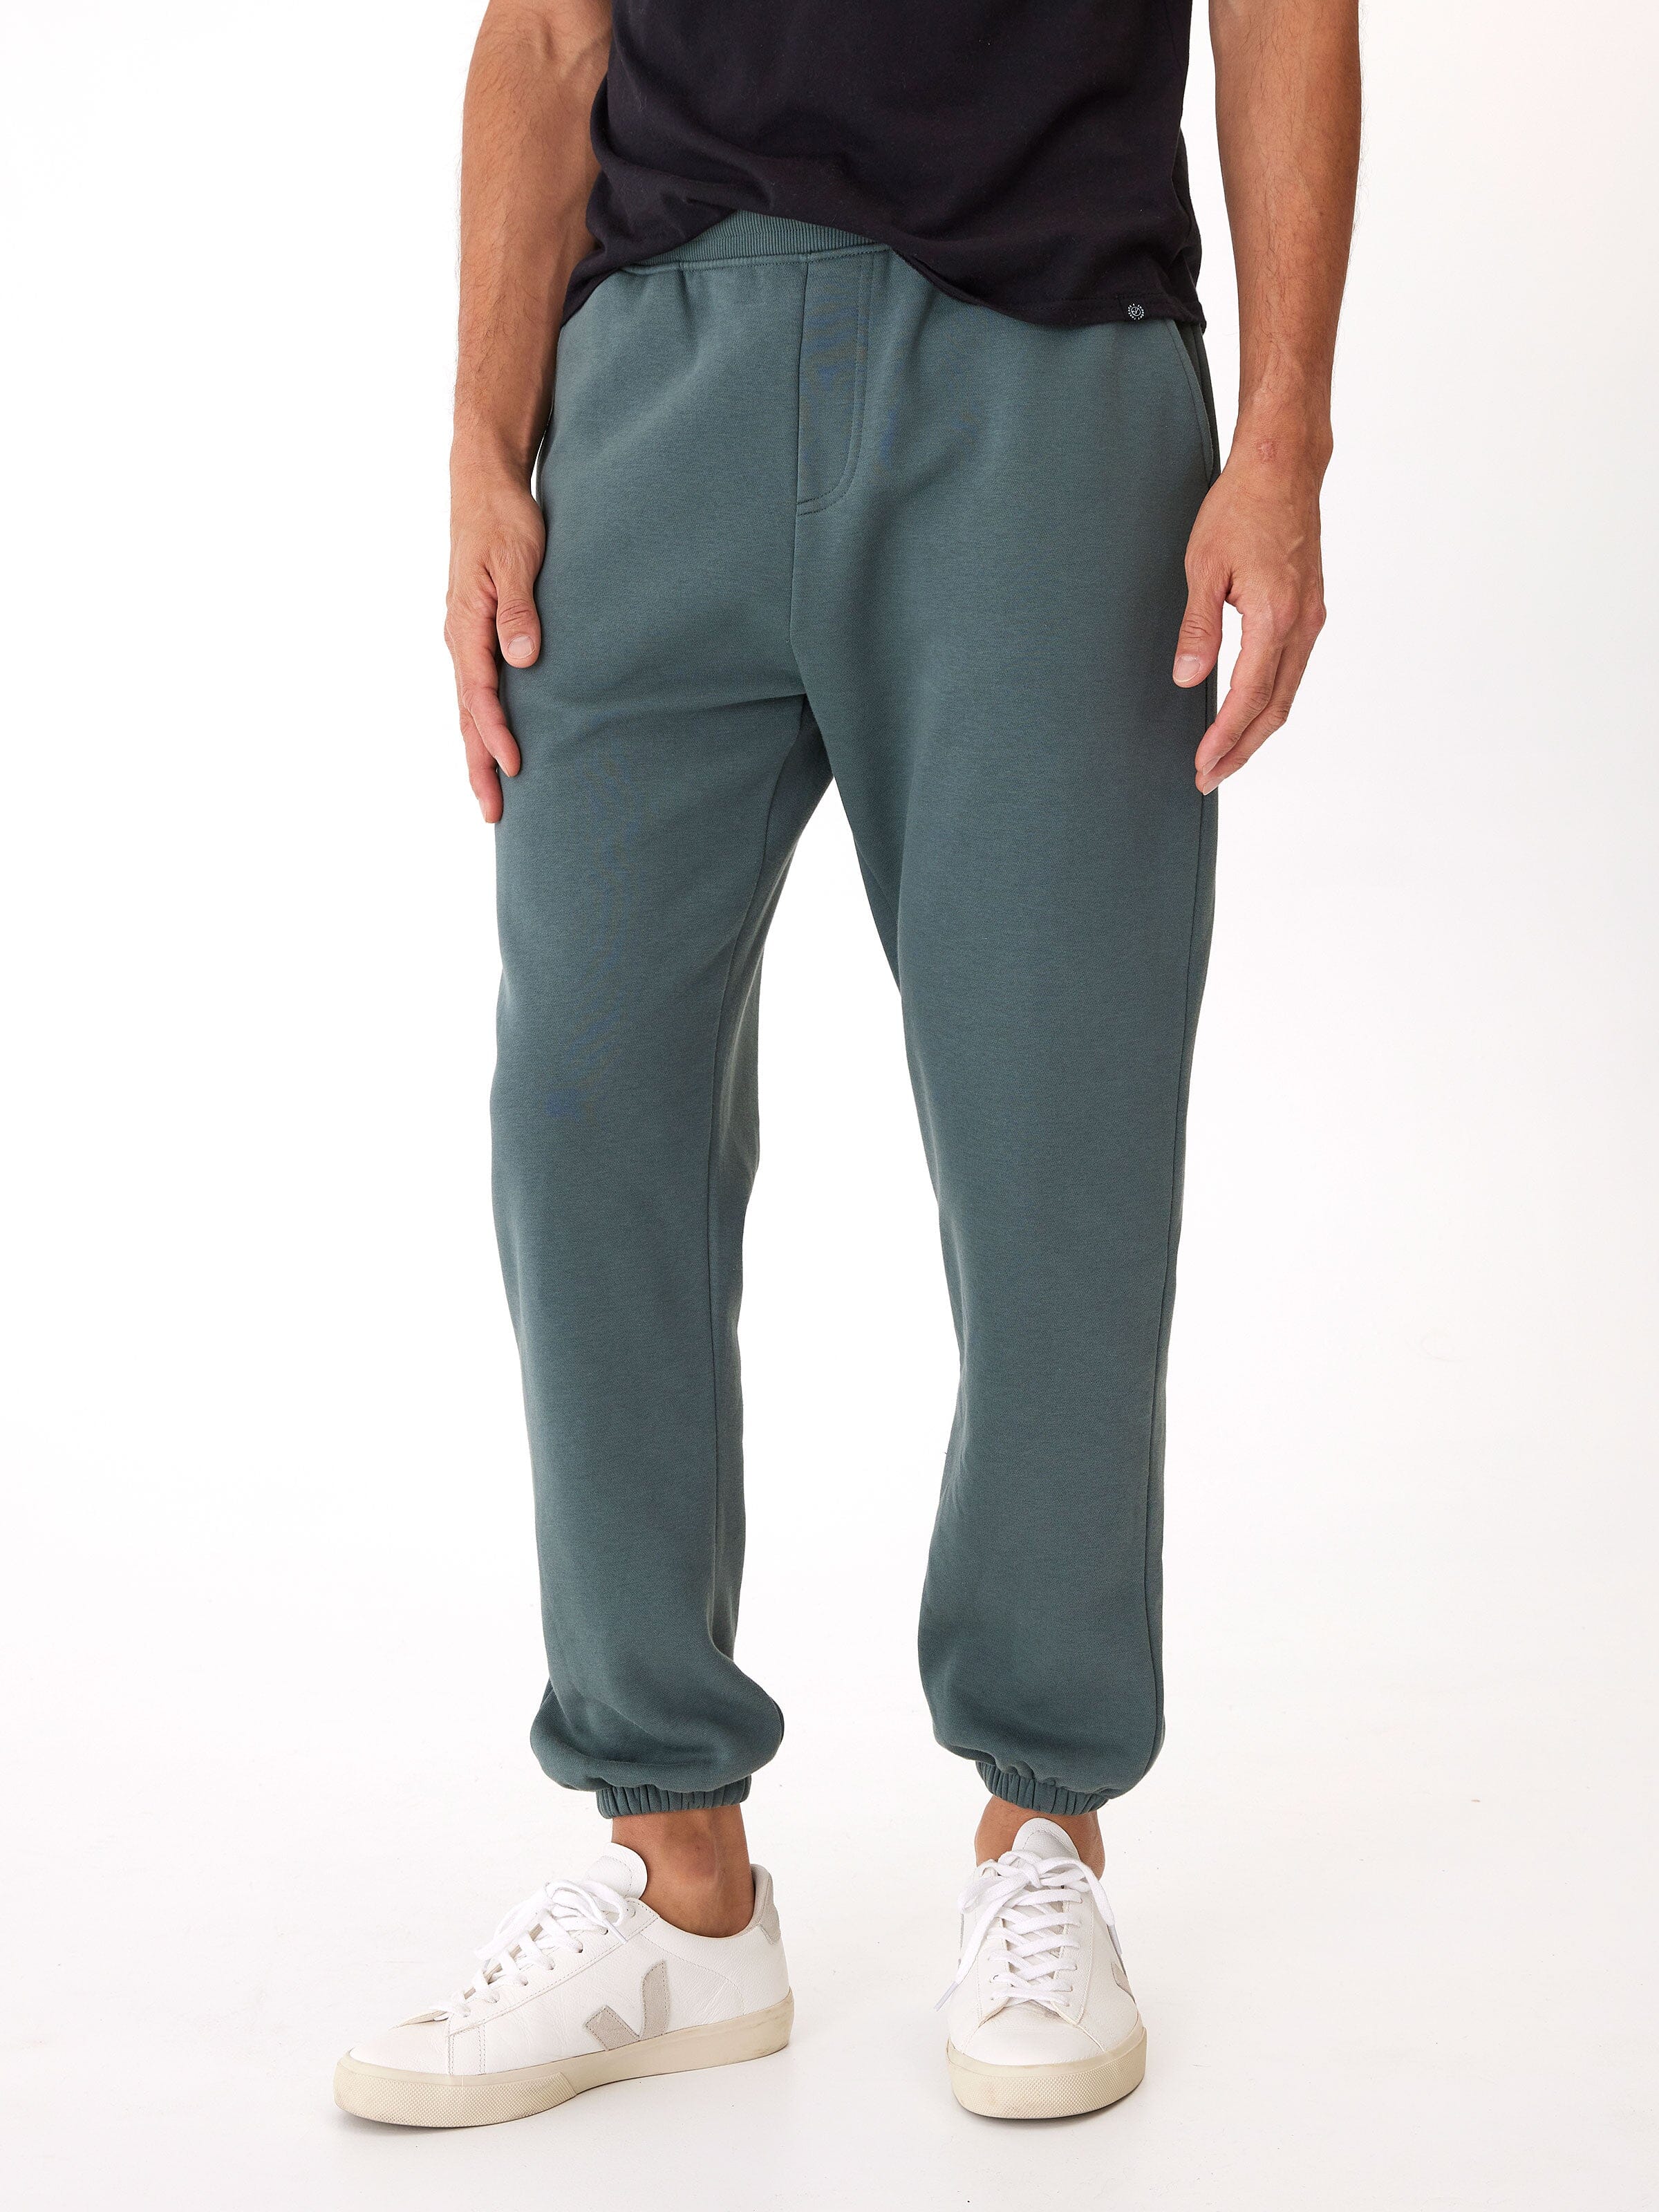 Unisex Plain Mens Jogger Lower, Medium at Rs 205/piece in Nanded